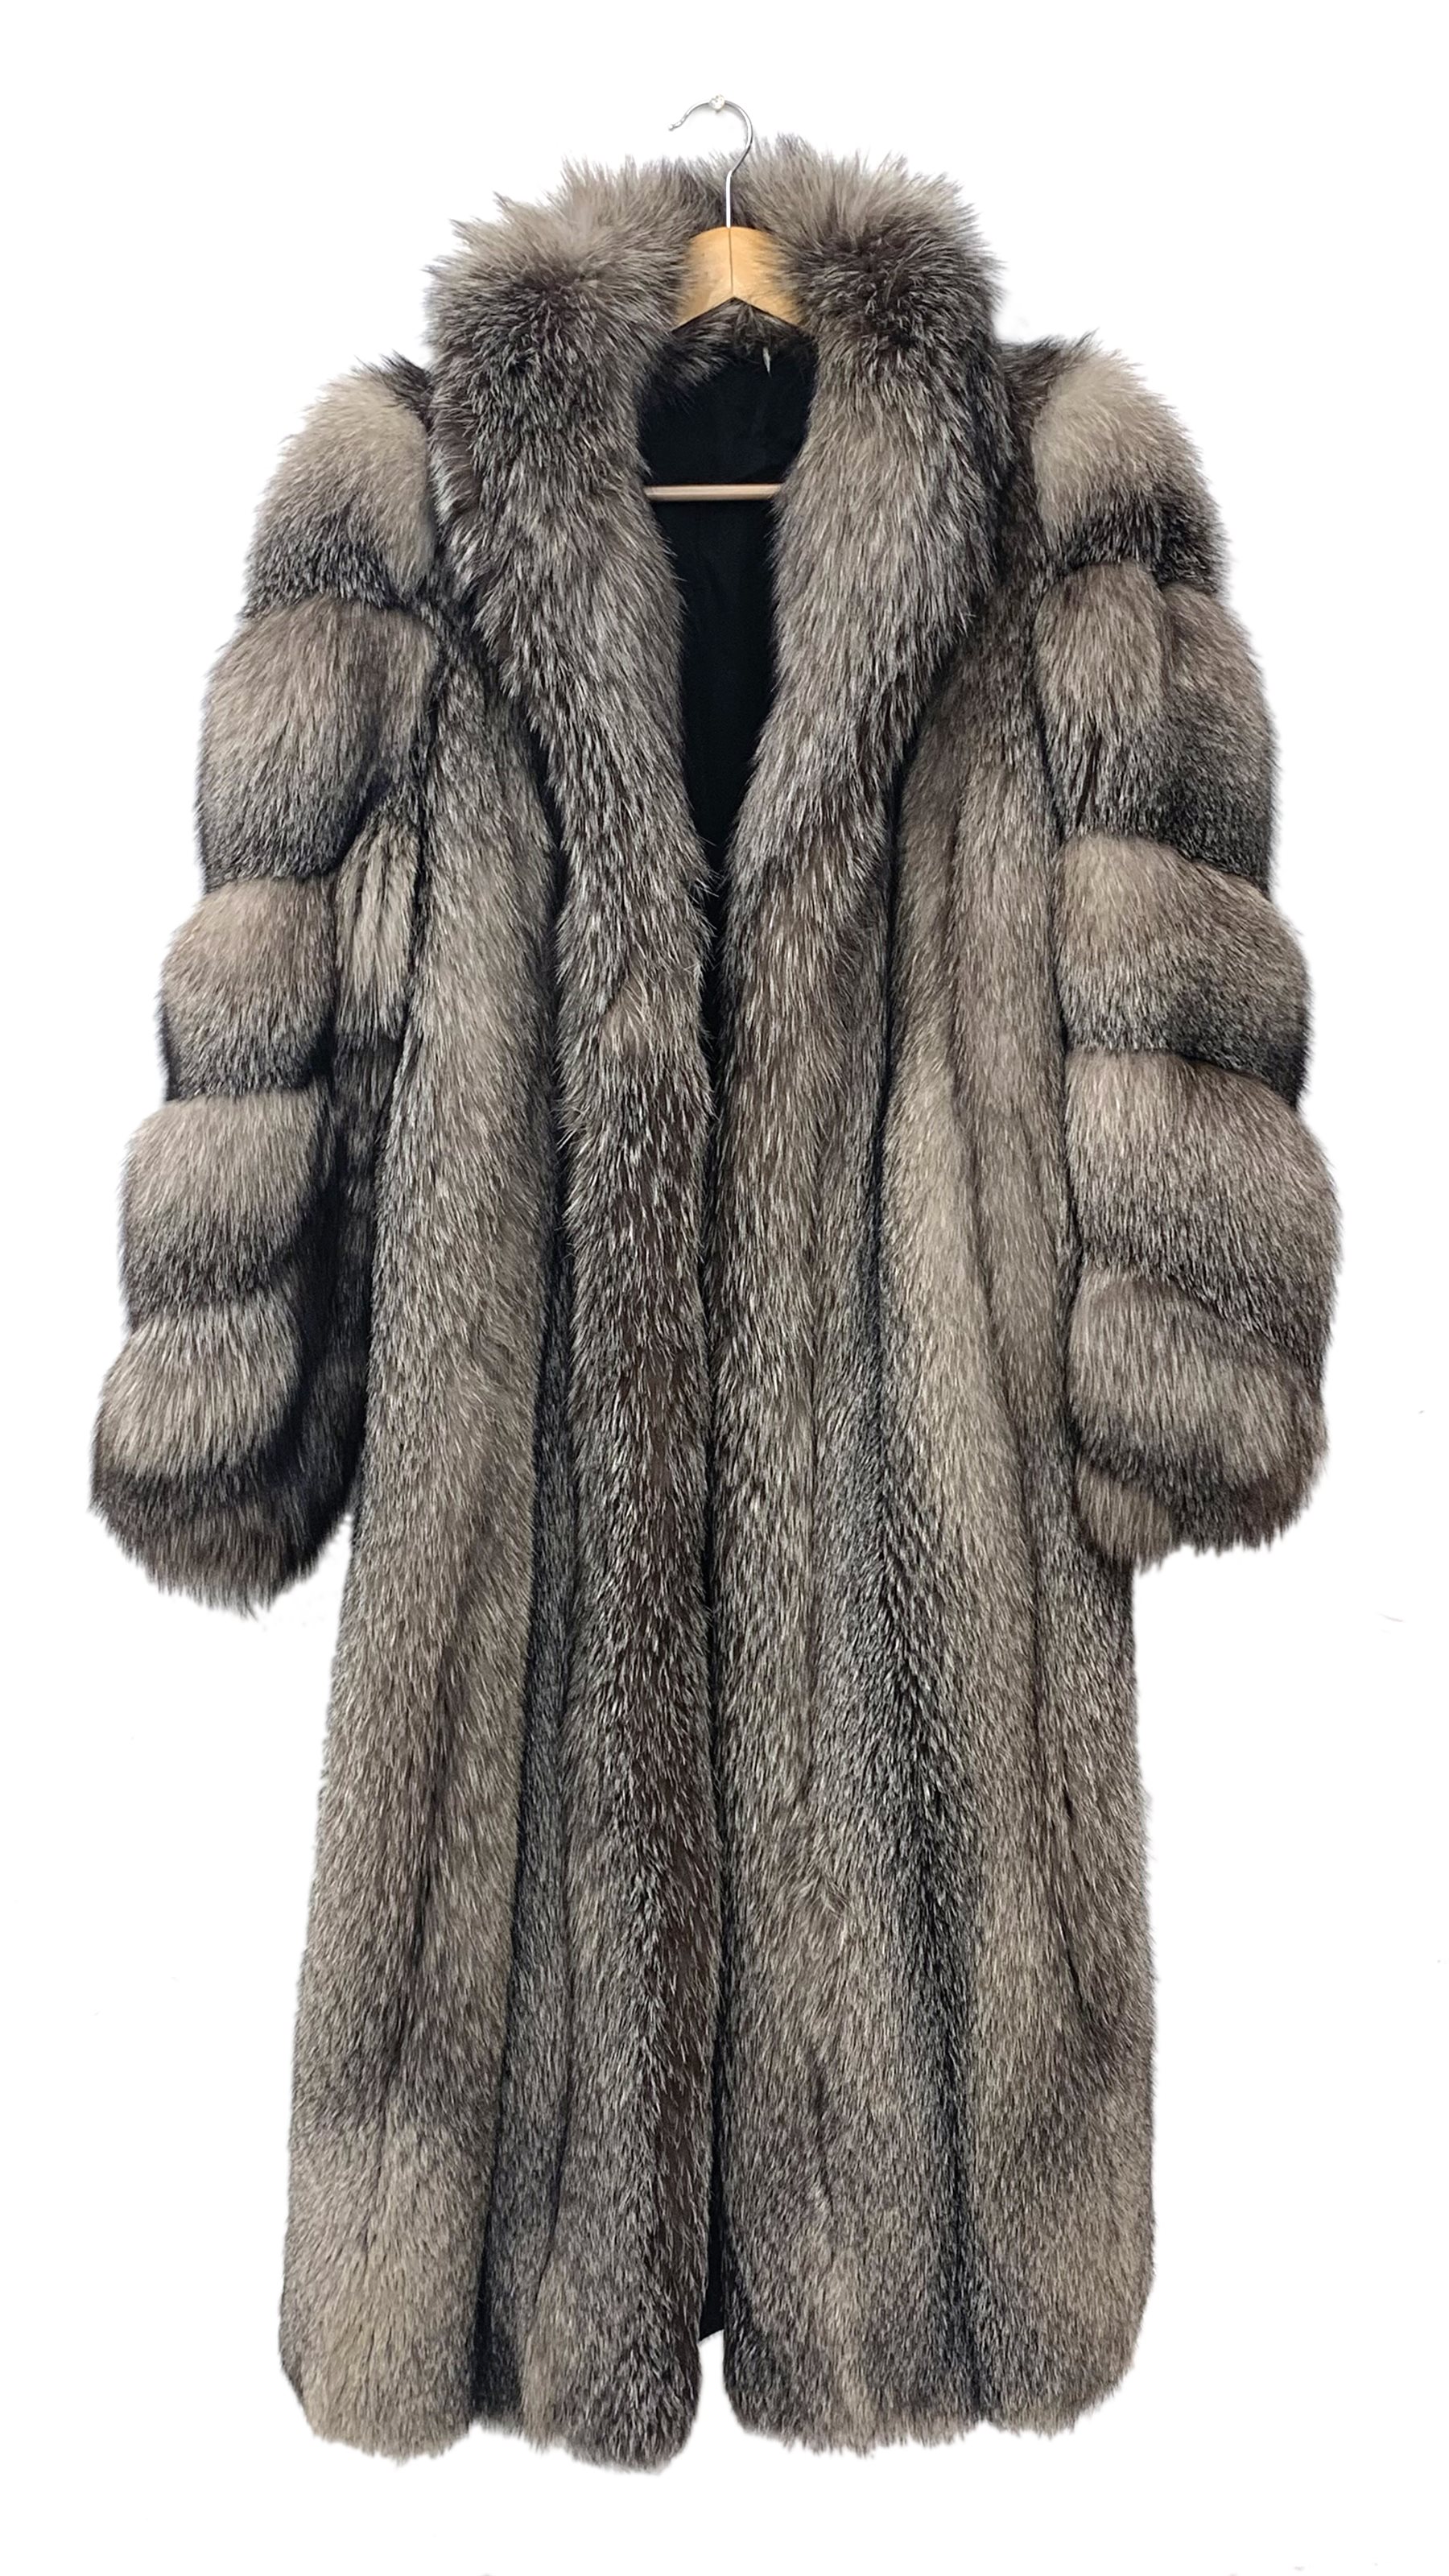 Fine quality full length Silver Fox fur Coat, approx. size 12 - 14 ...